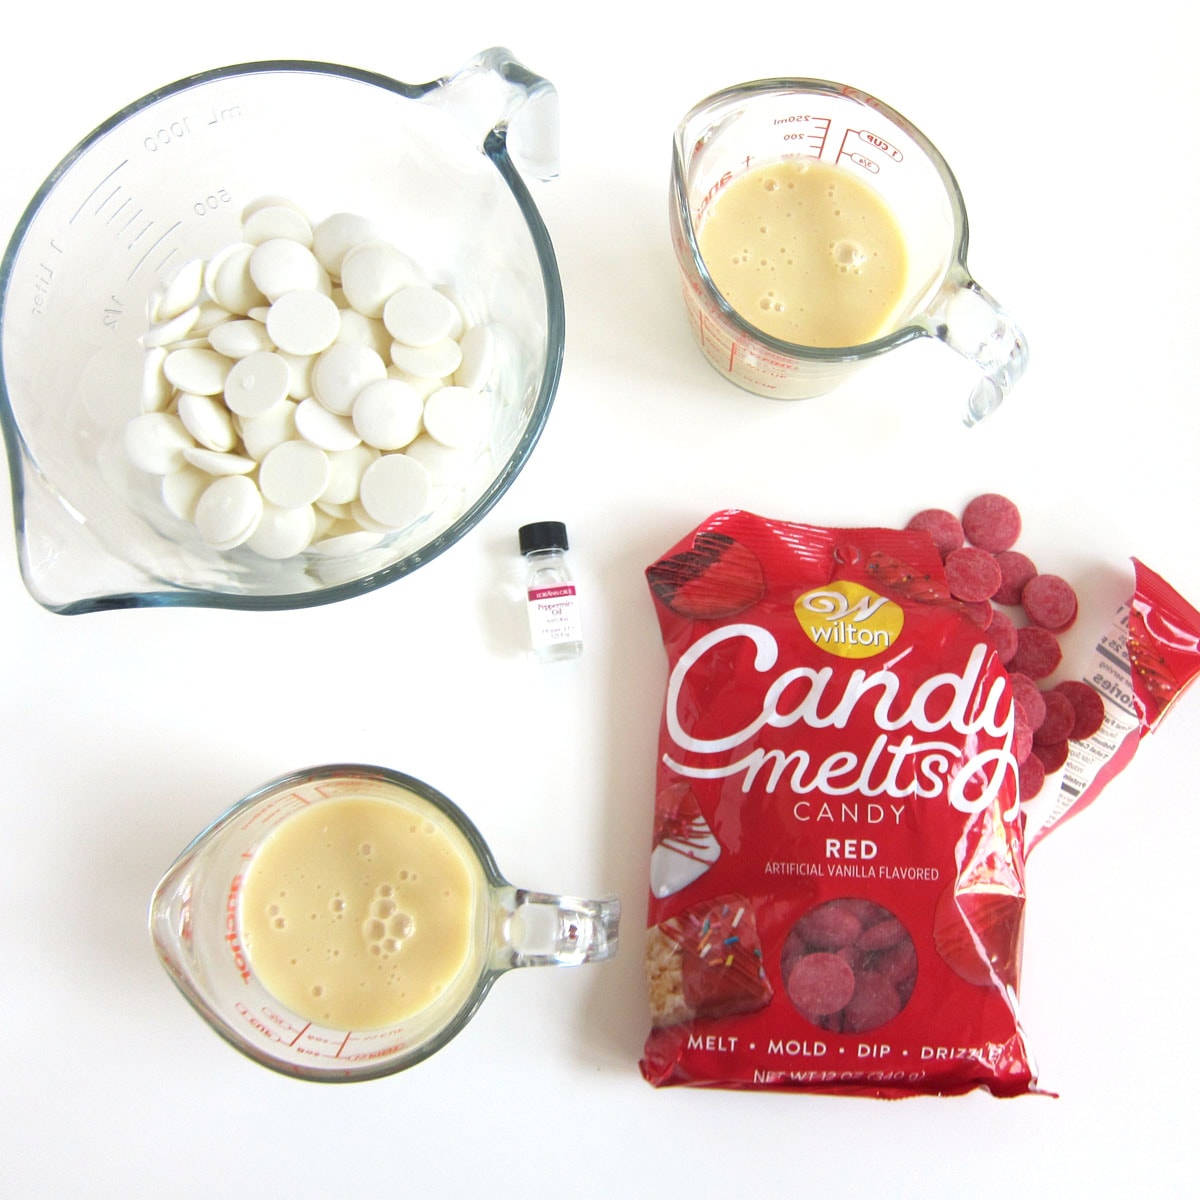 red and white candy melts with sweetened condensed milk and peppermint oil